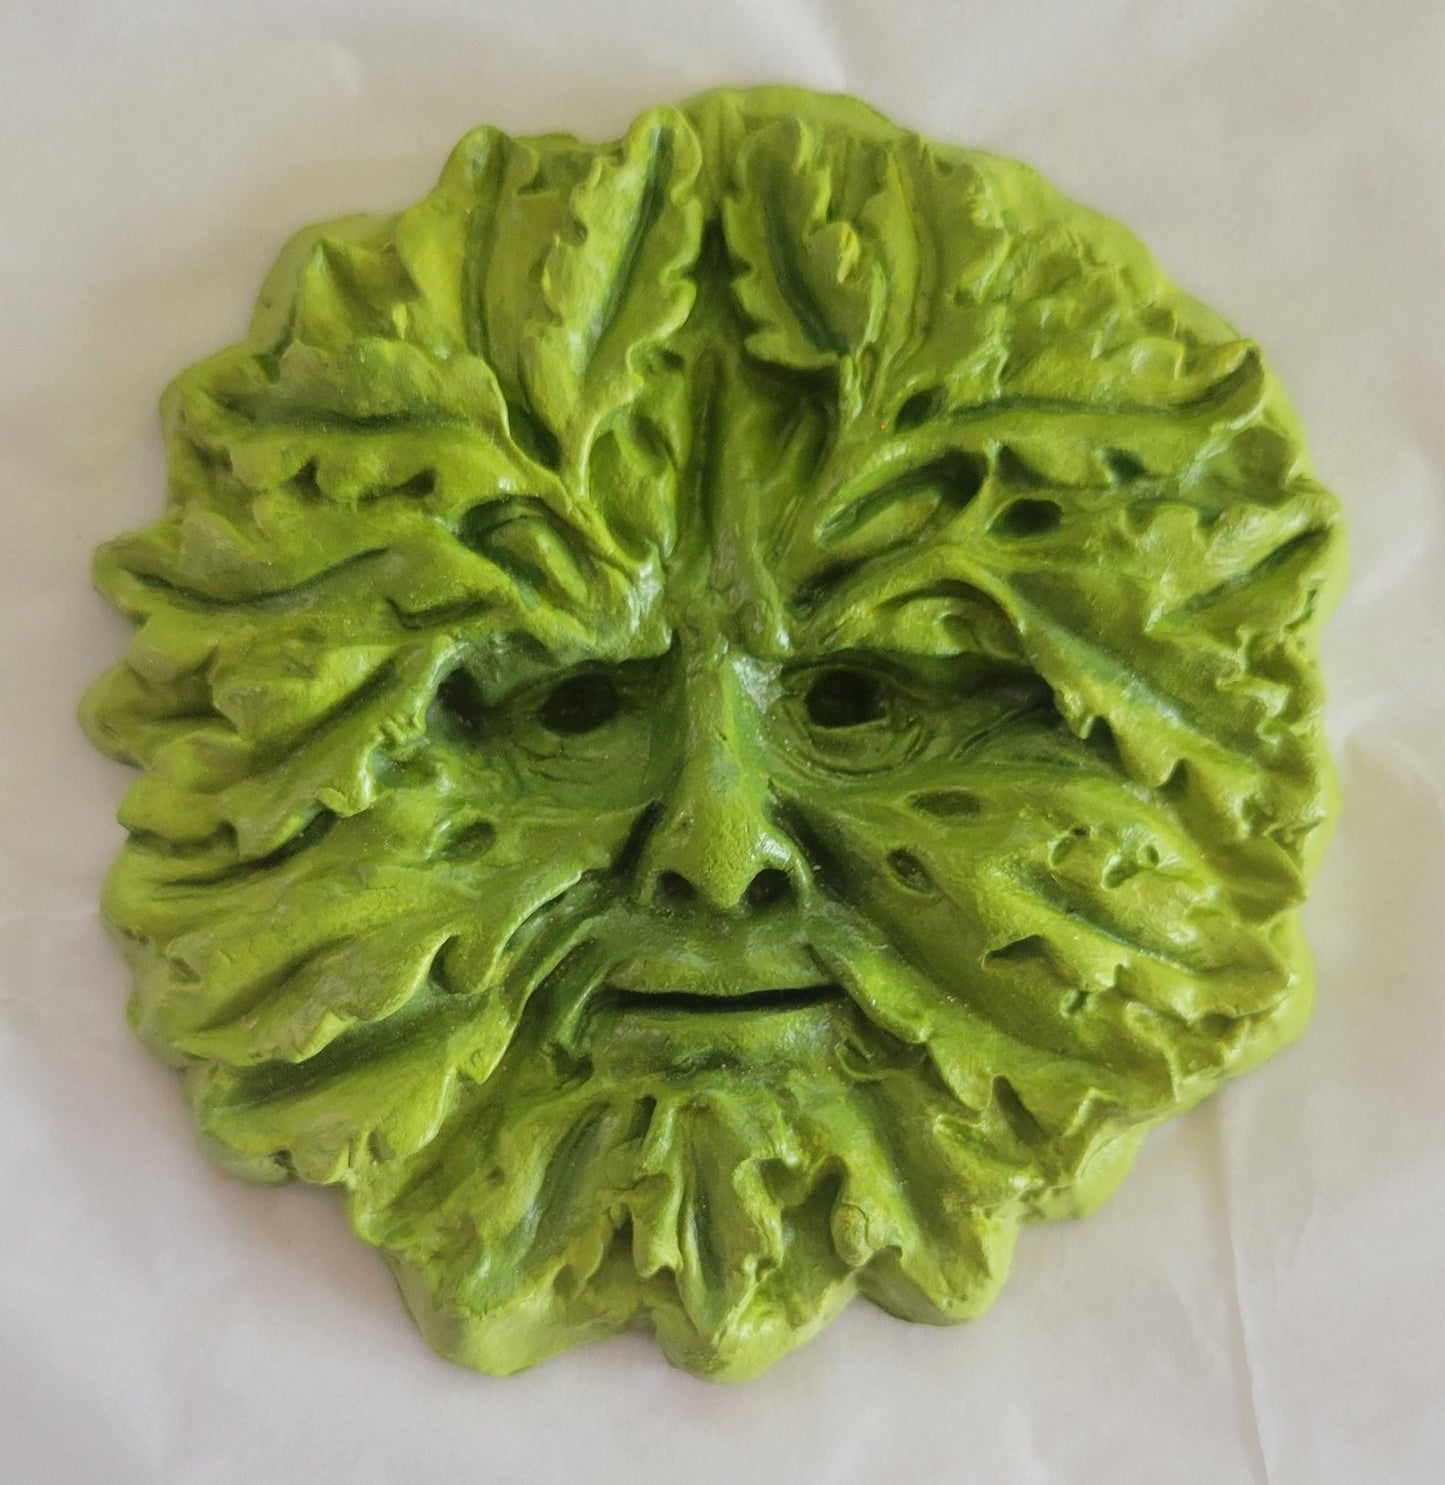 Greenman decoration, Medieval architecture, gifts for history lovers, handmade. Green